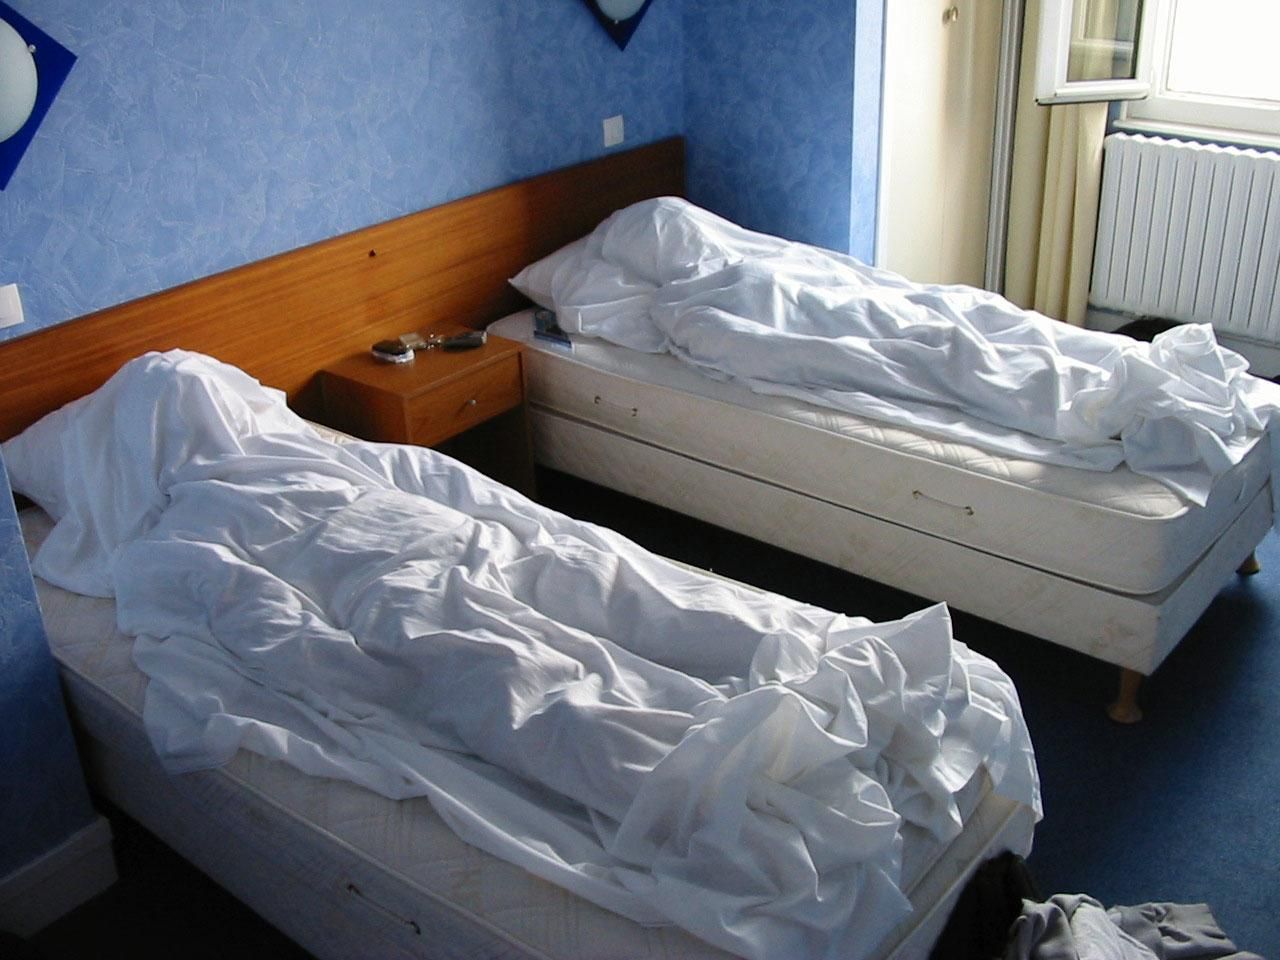 A few years ago, a friend and I made false corpses with sheets before leaving our hotel